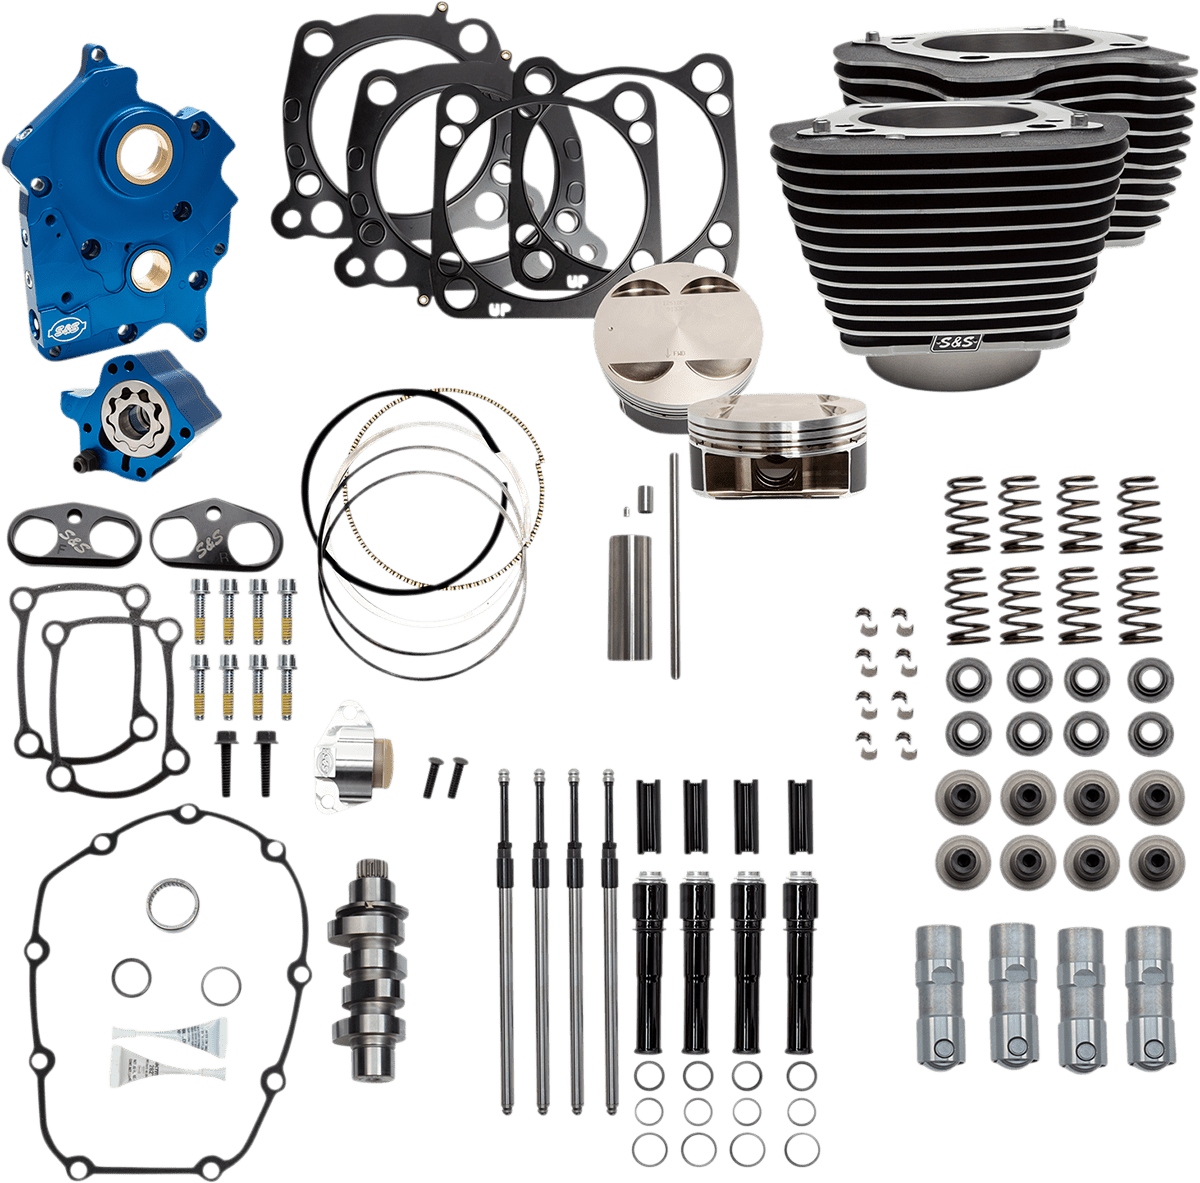 S&S CYCLES-124" Power Package Engine Performance Kits / '17-'23 107" M8 Motors-Big Bore Kit-MetalCore Harley Supply